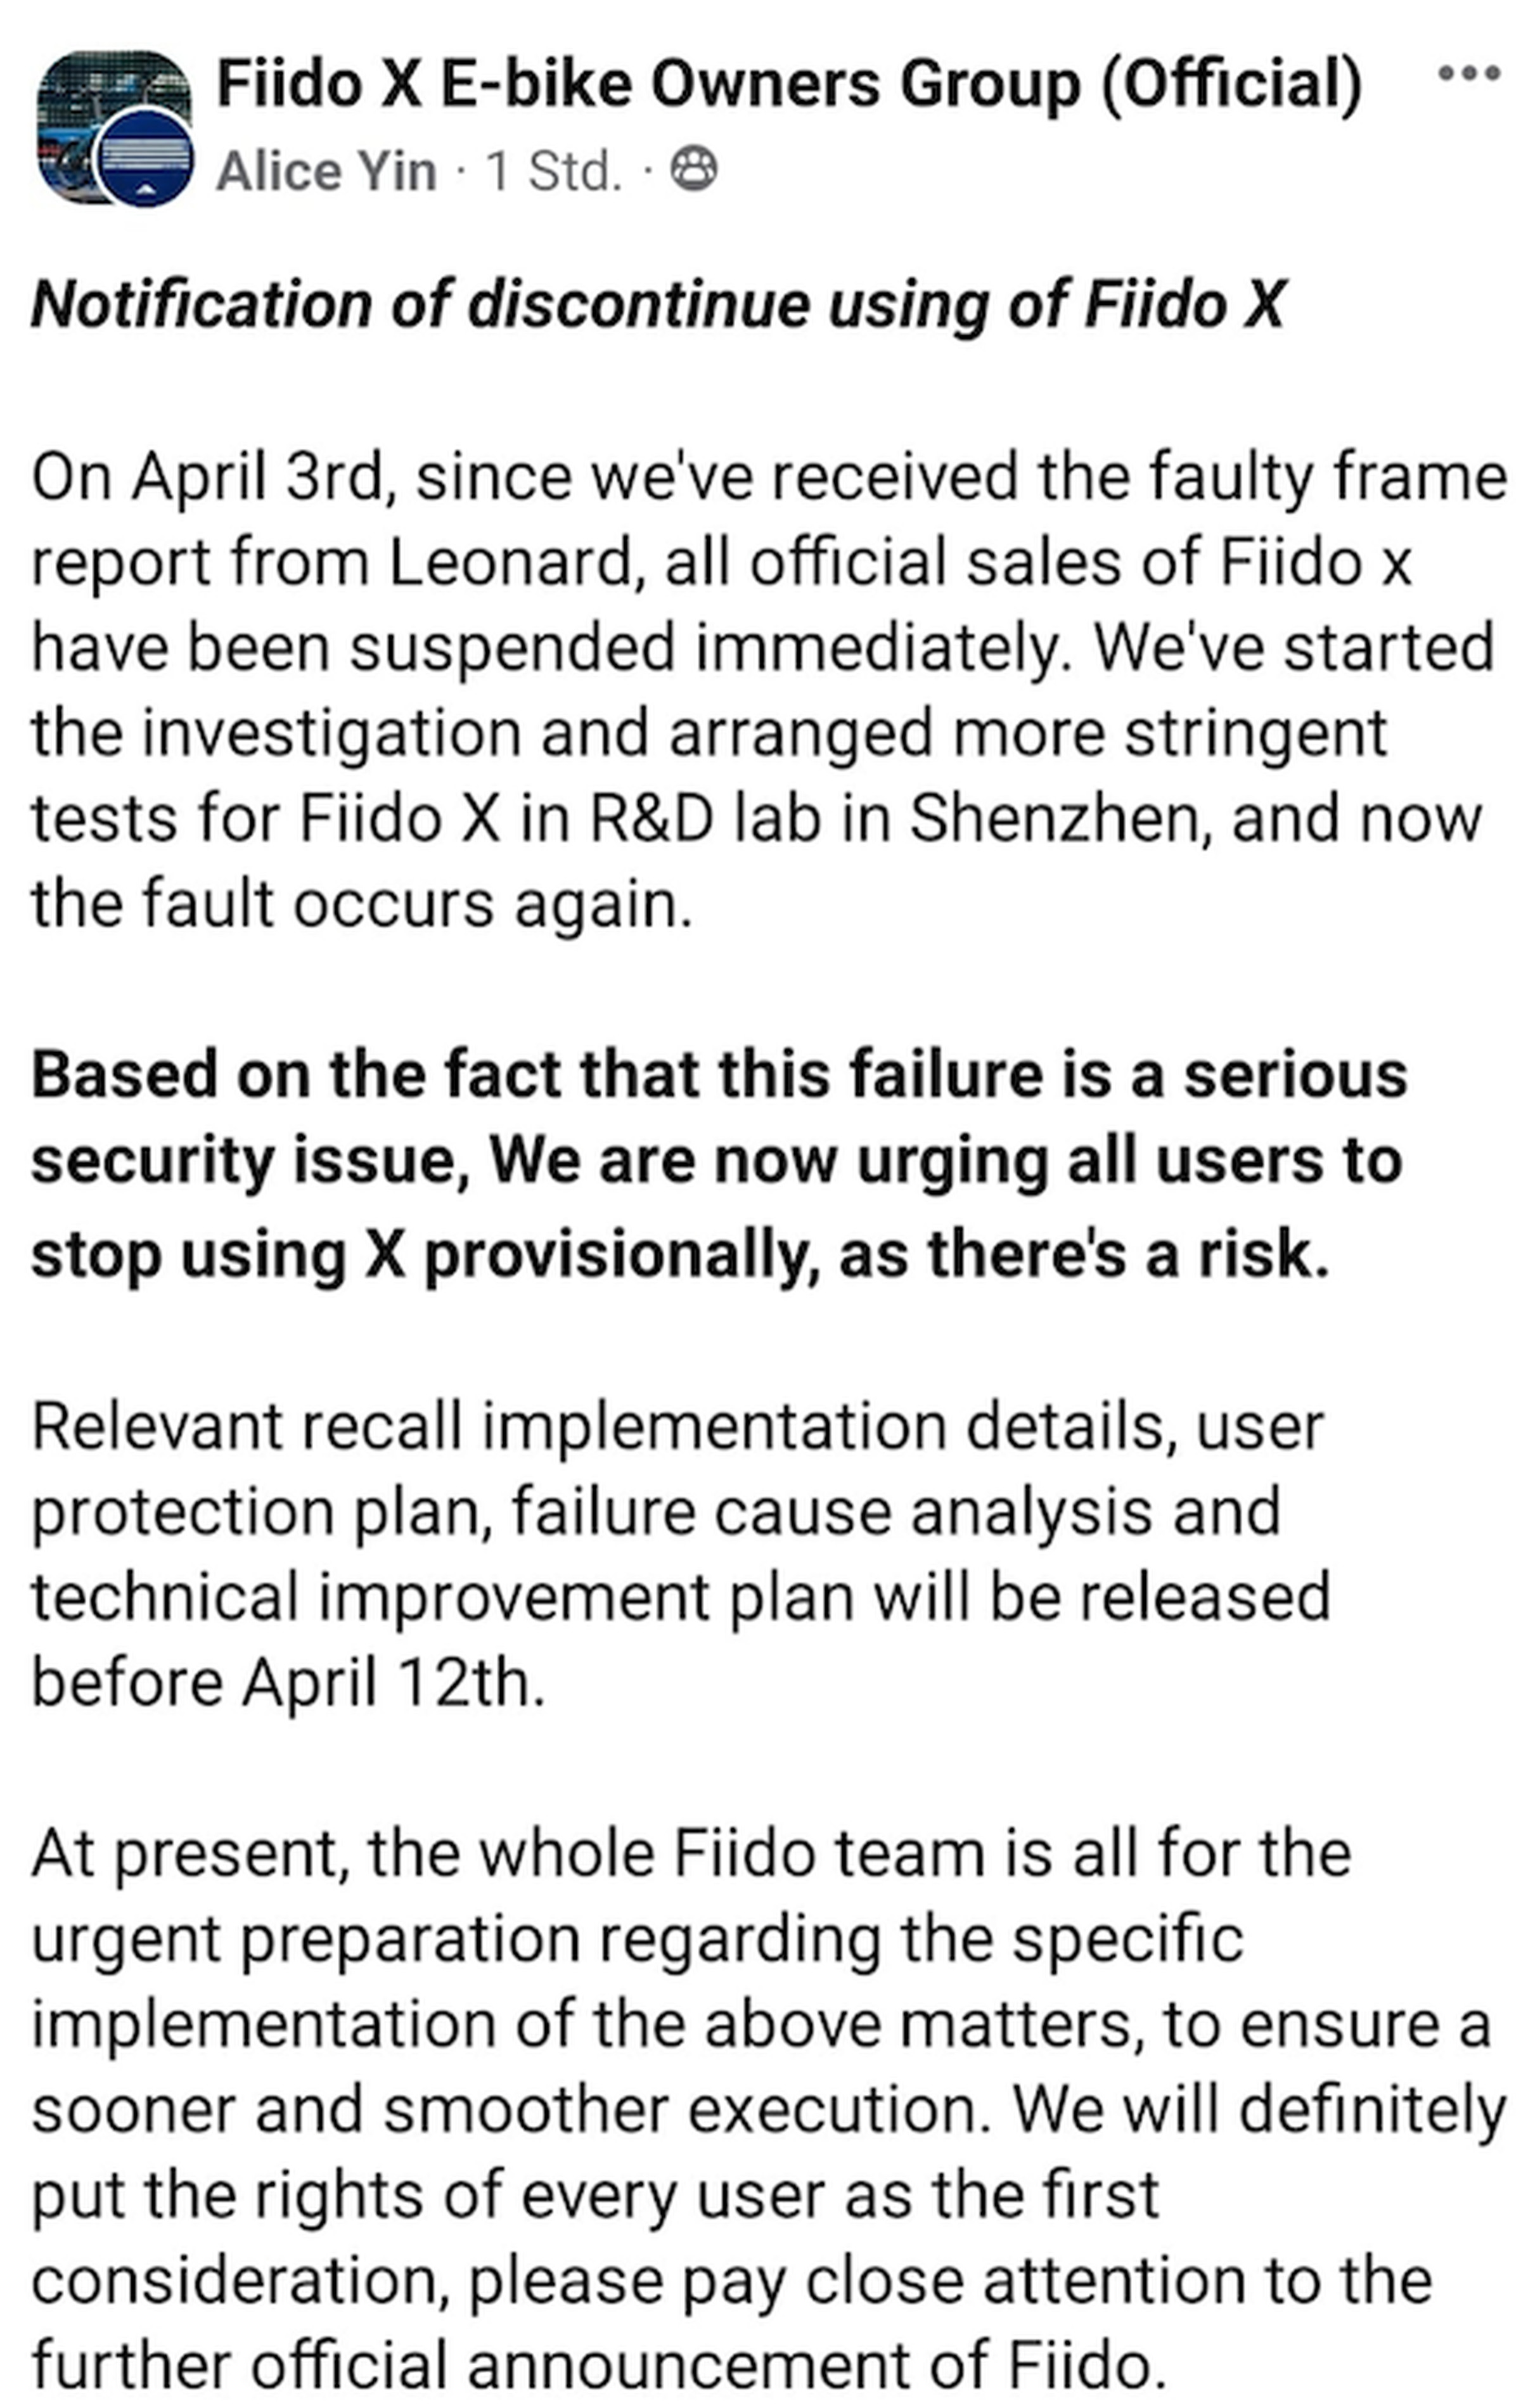 Fiido statement posted in the private Fiido X E-bike Owners Group on Facebook.